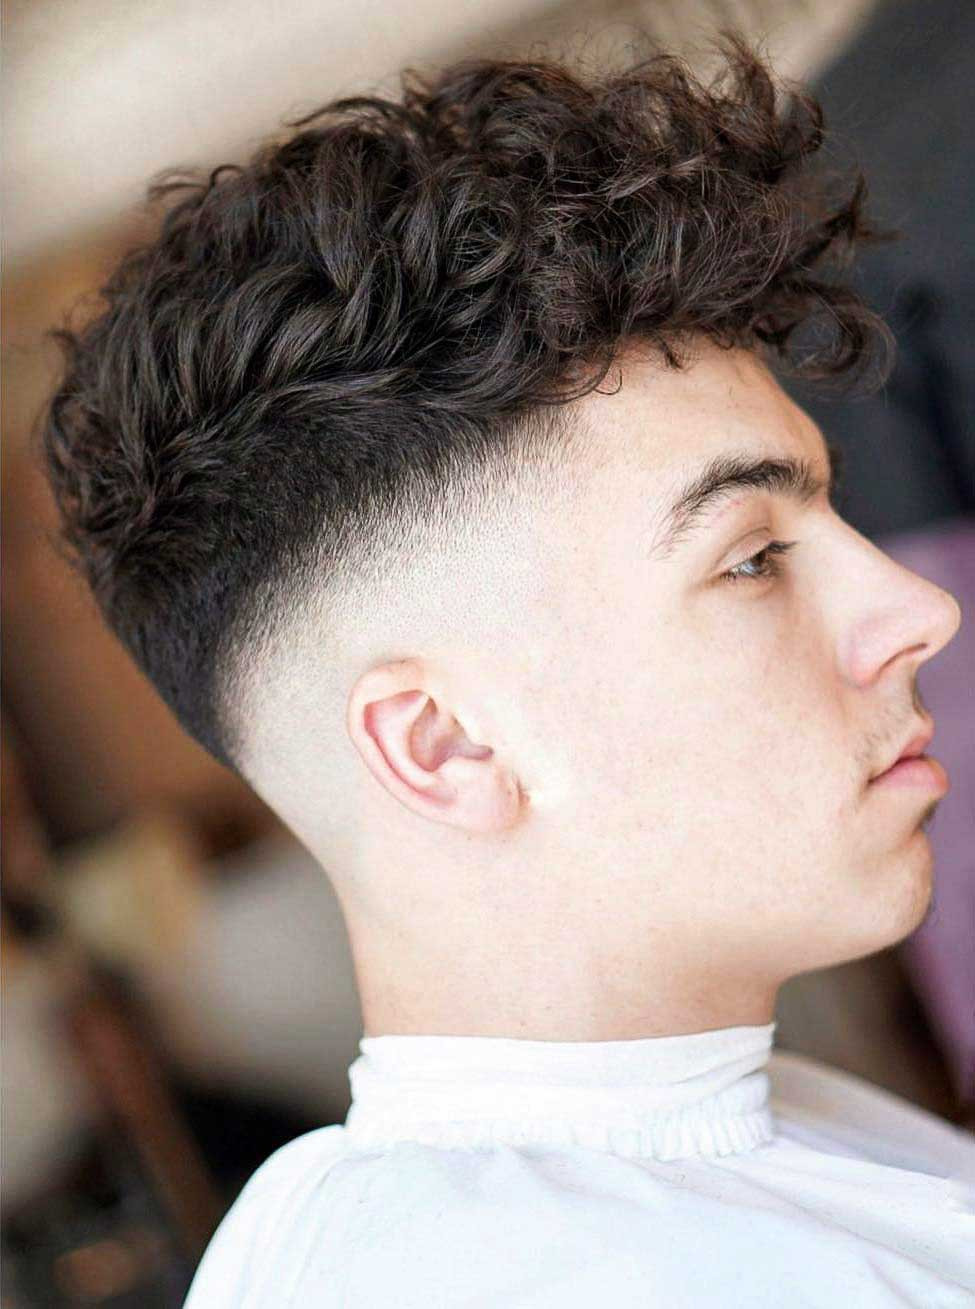 Hairstyle For Curly Hair Boy
 The 45 Best Curly Hairstyles for Men